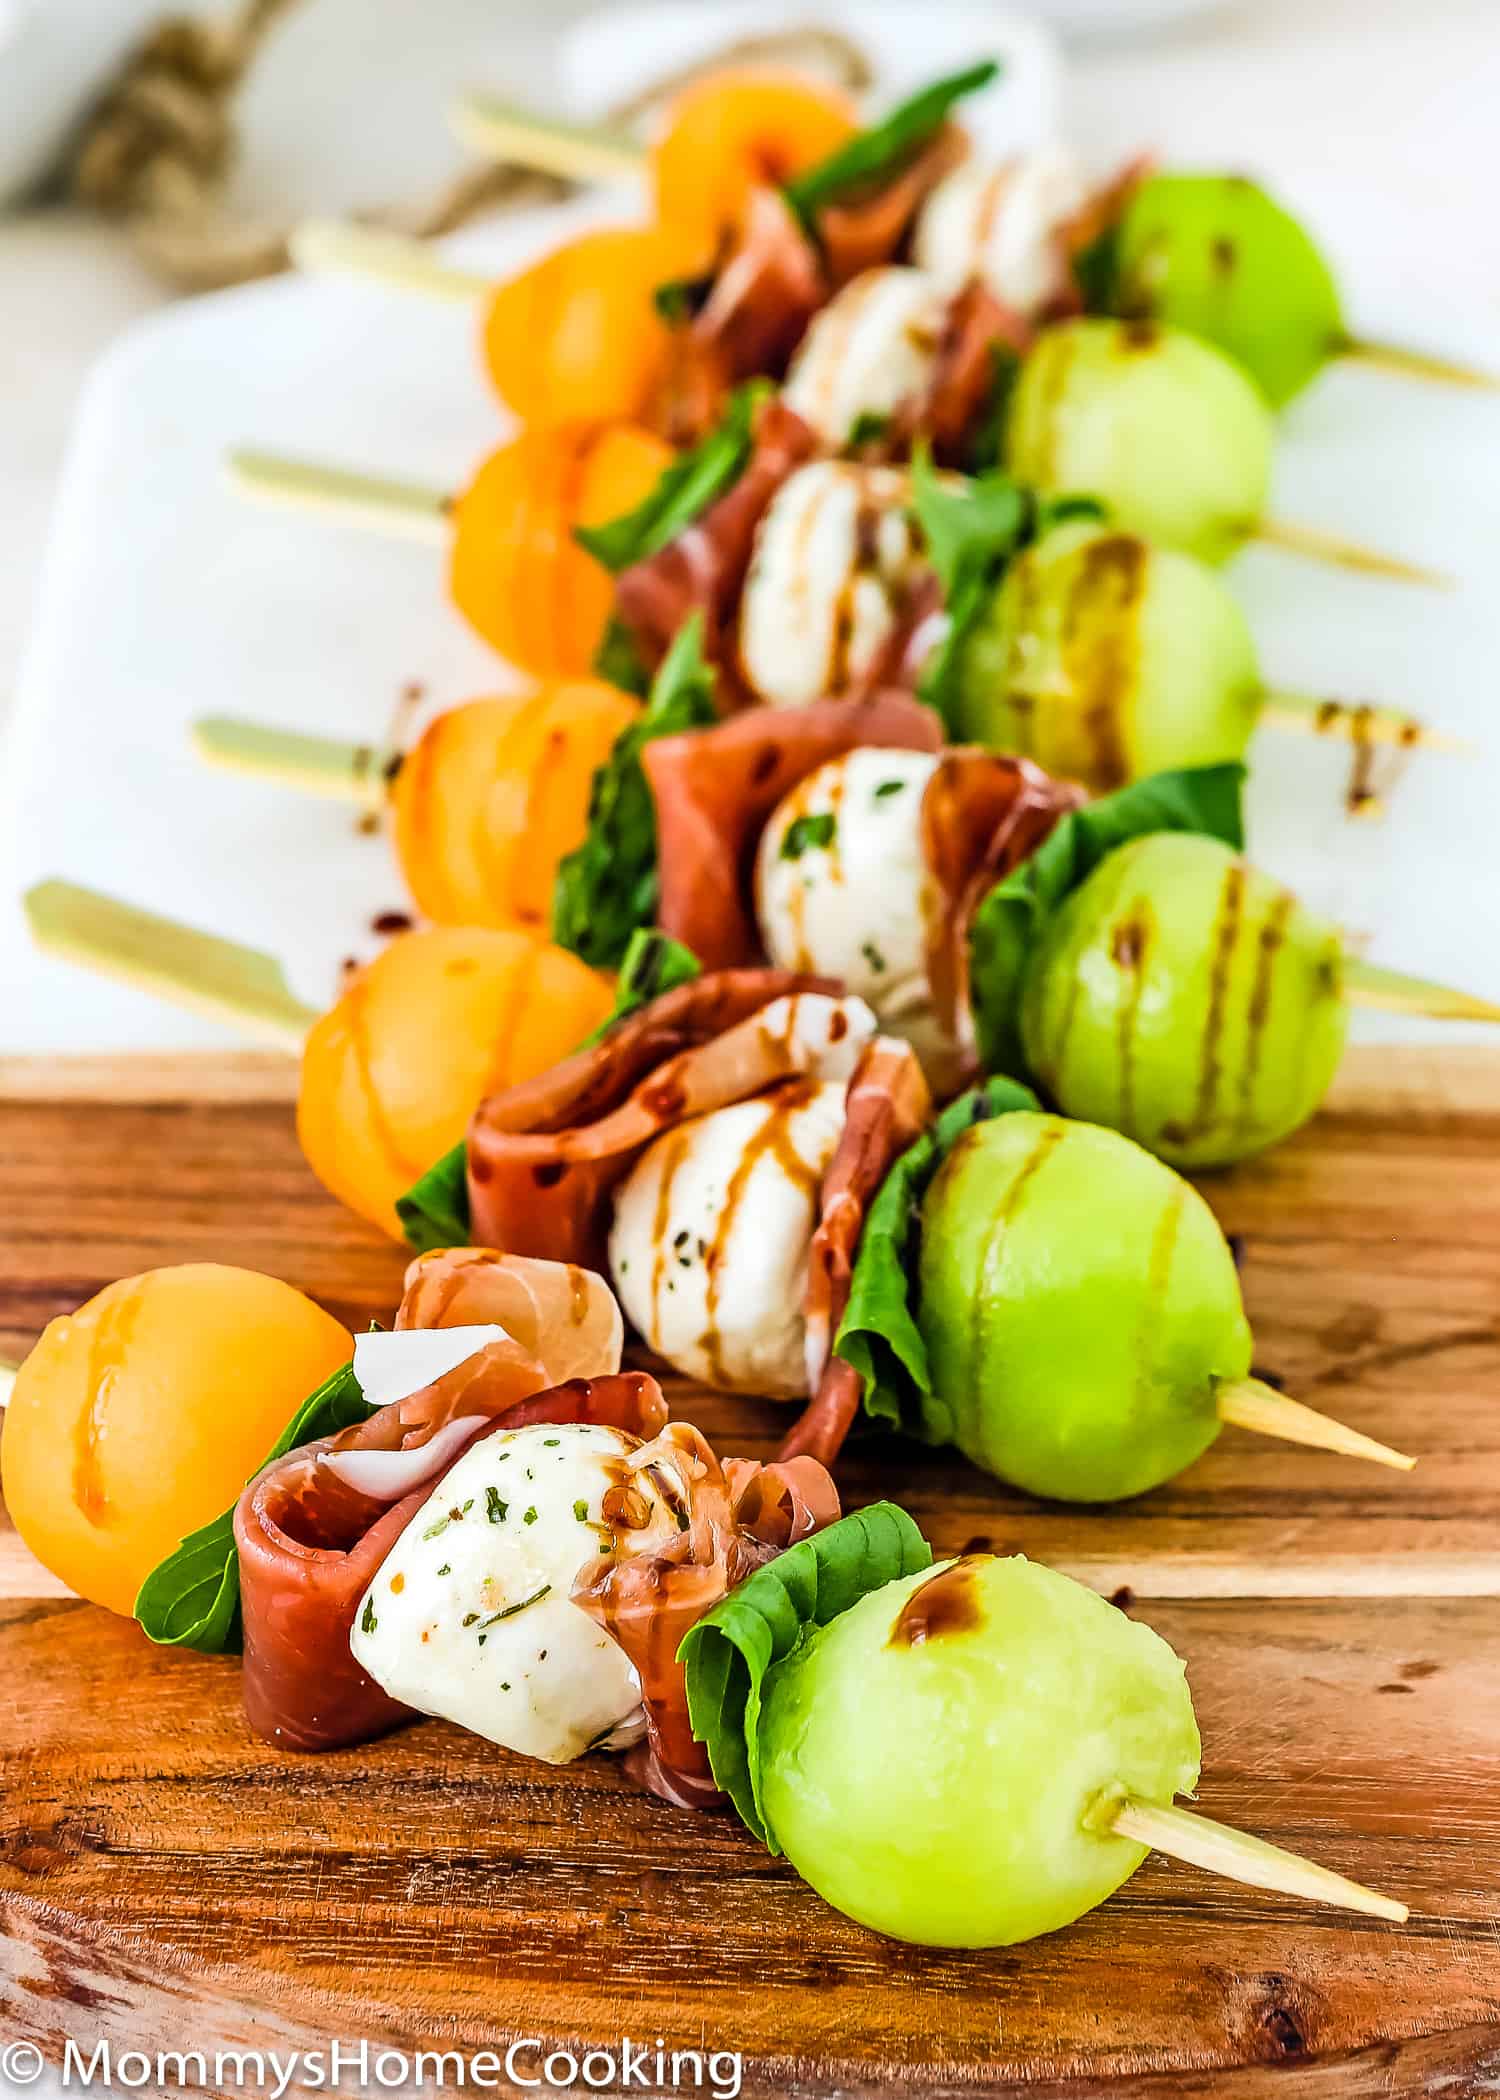 Prosciutto Melon appetizers on a cutting board drizzled with balsamic glaze.